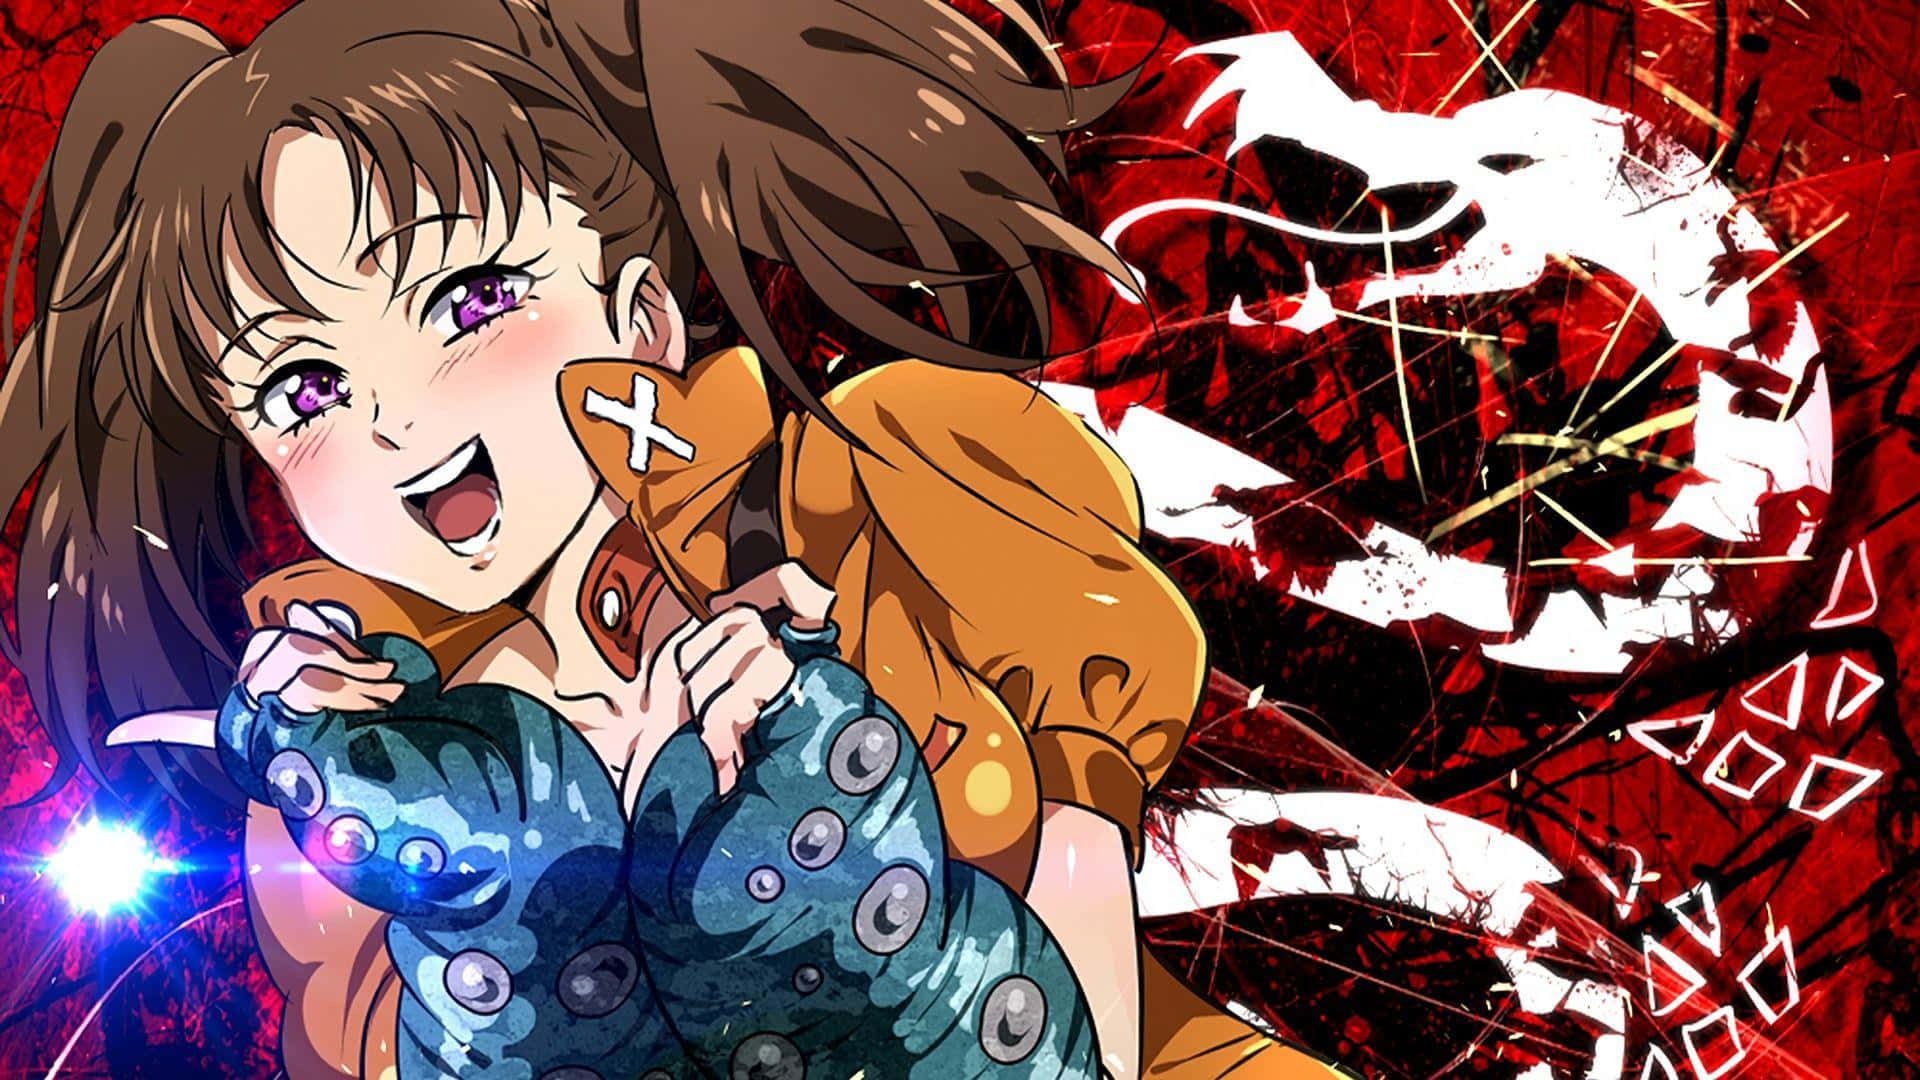 Diane - The Serpent's Sin of Envy from Seven Deadly Sins Wallpaper